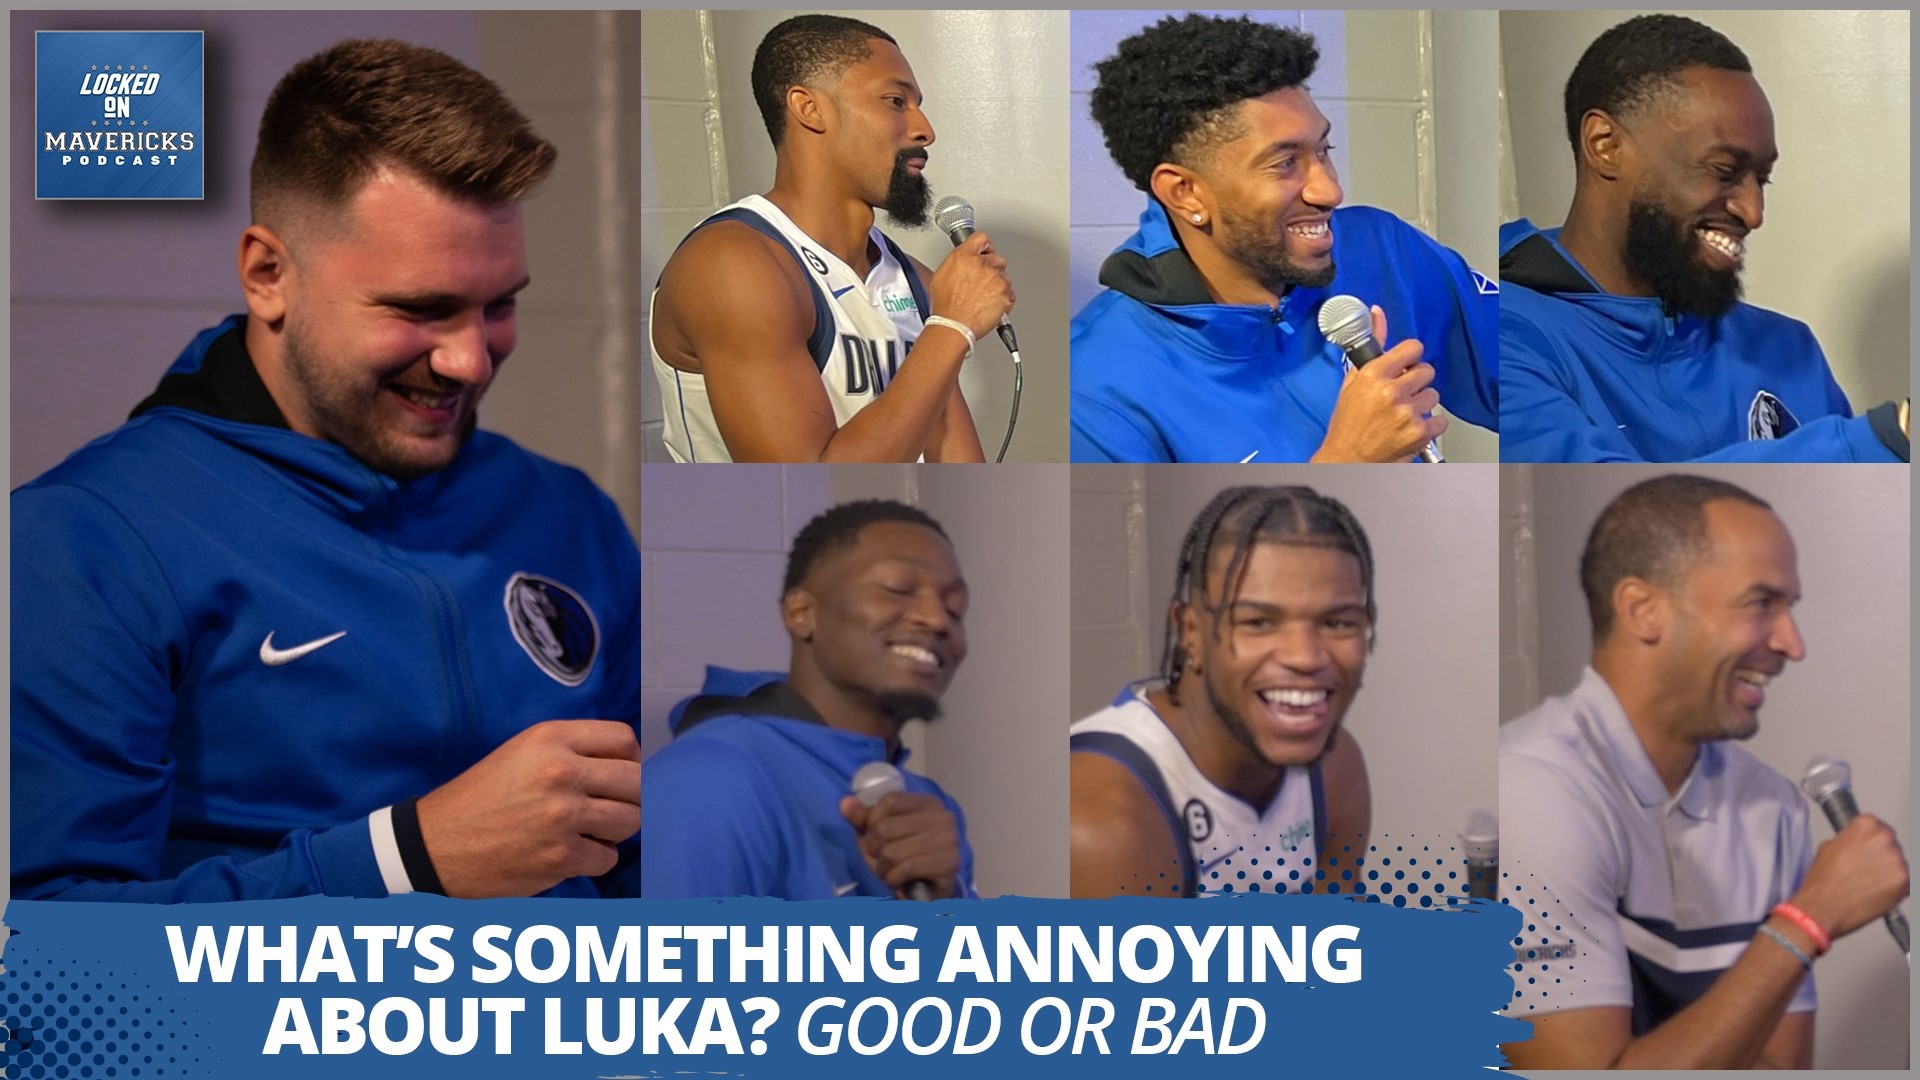 On Dallas Mavericks Media Day we asked Luka Doncic's teammates what's something annoying about the Mavs' star player (good or bad).